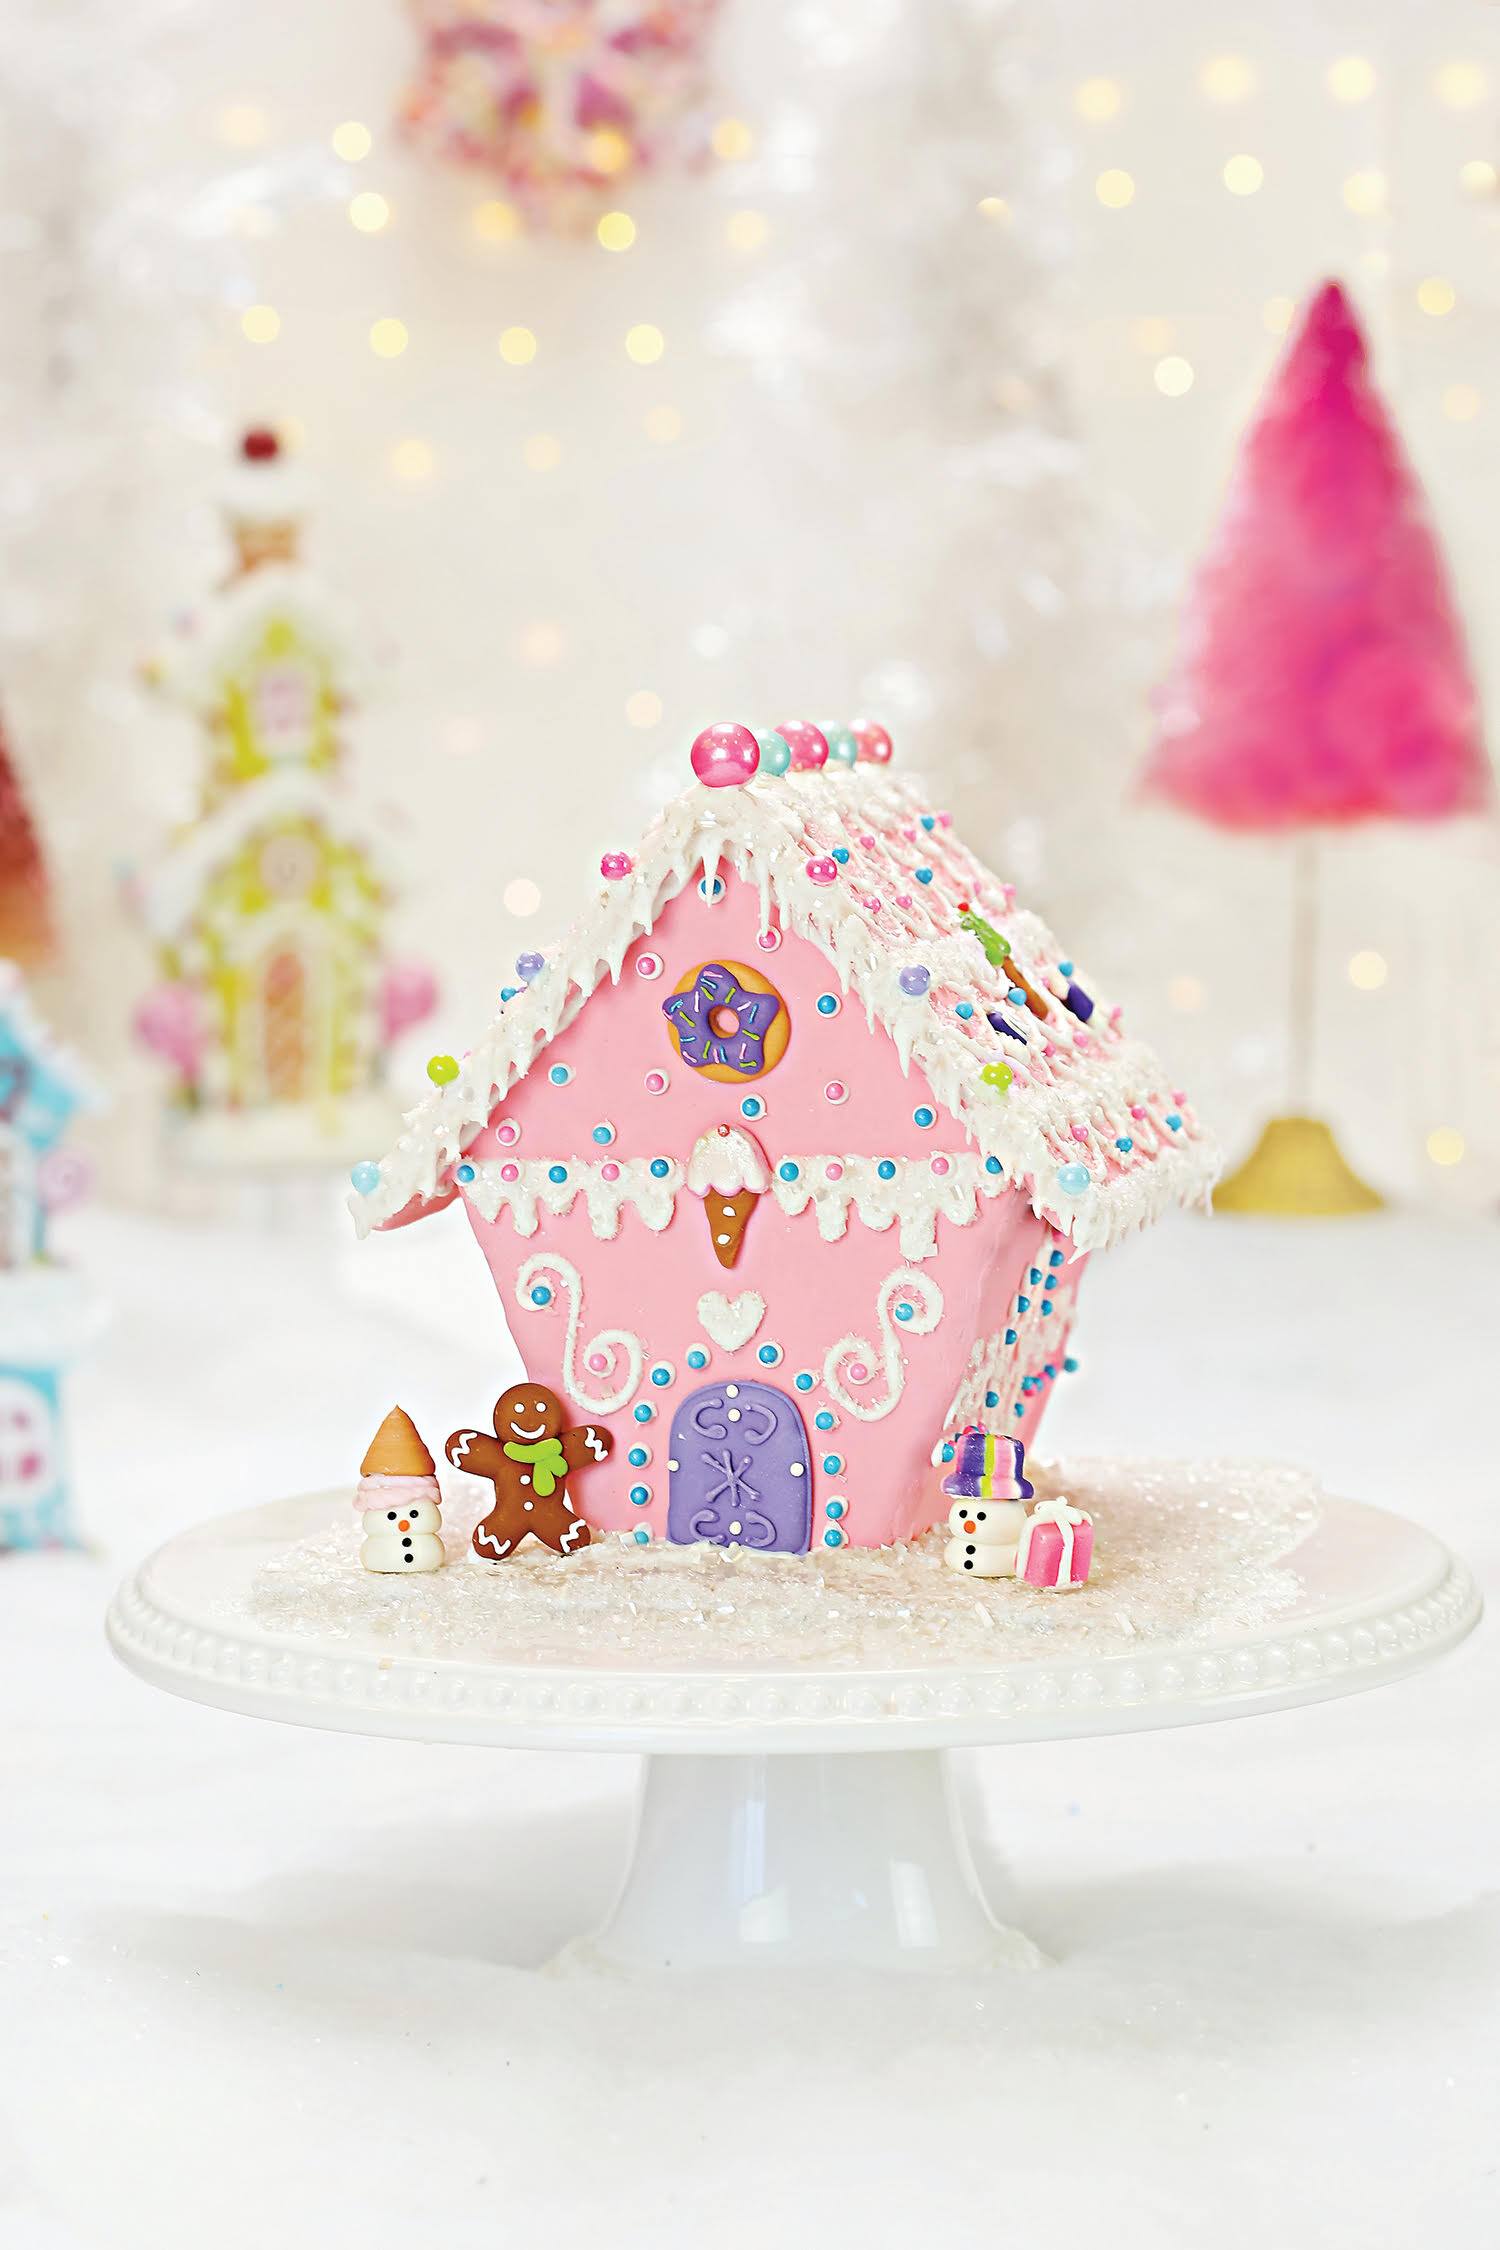 Gingerbread House: Bakery, Candy cottage, Cookie construction, Jelly beans, A coating of powdered sugar snow. 1500x2250 HD Background.